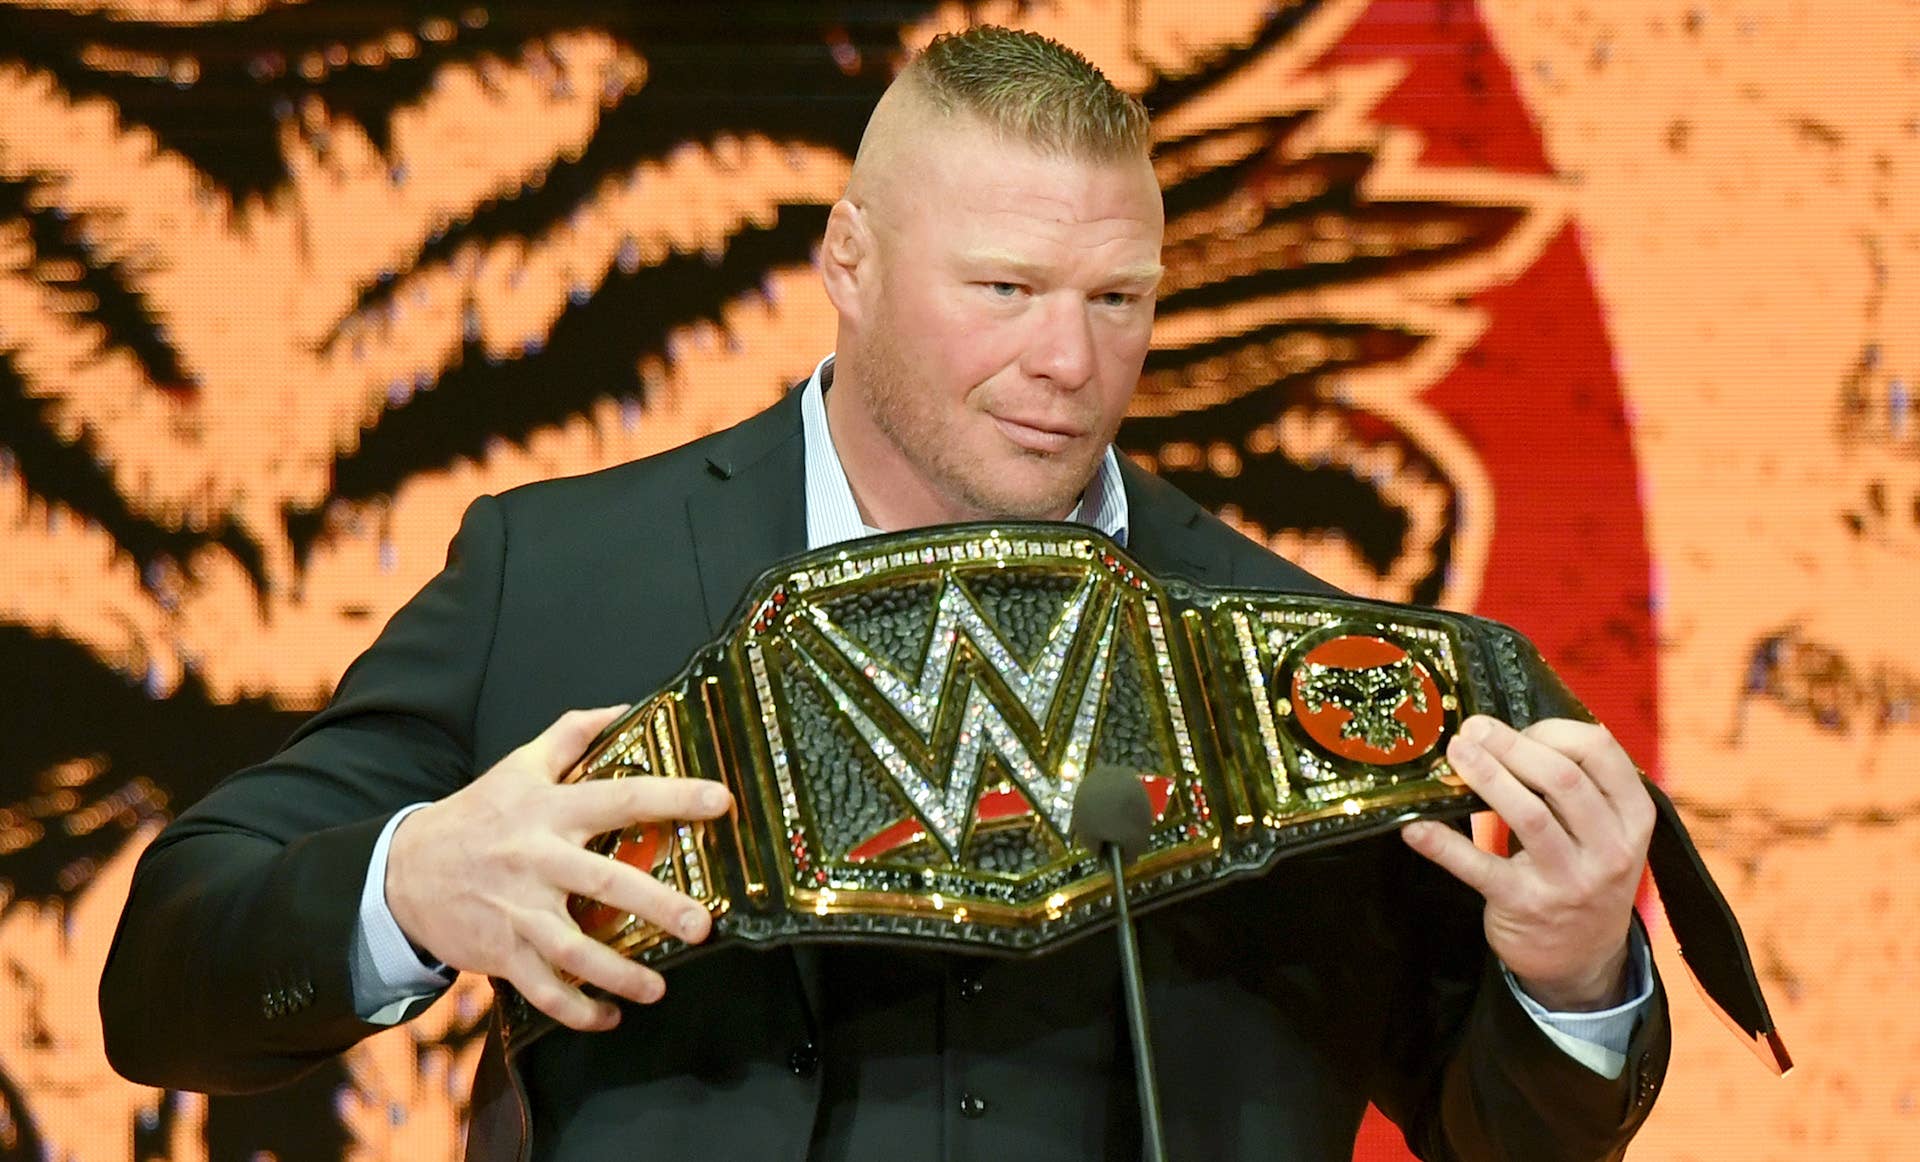 WWE champion Brock Lesnar is introduced at a WWE news conference at T-Mobile Arena